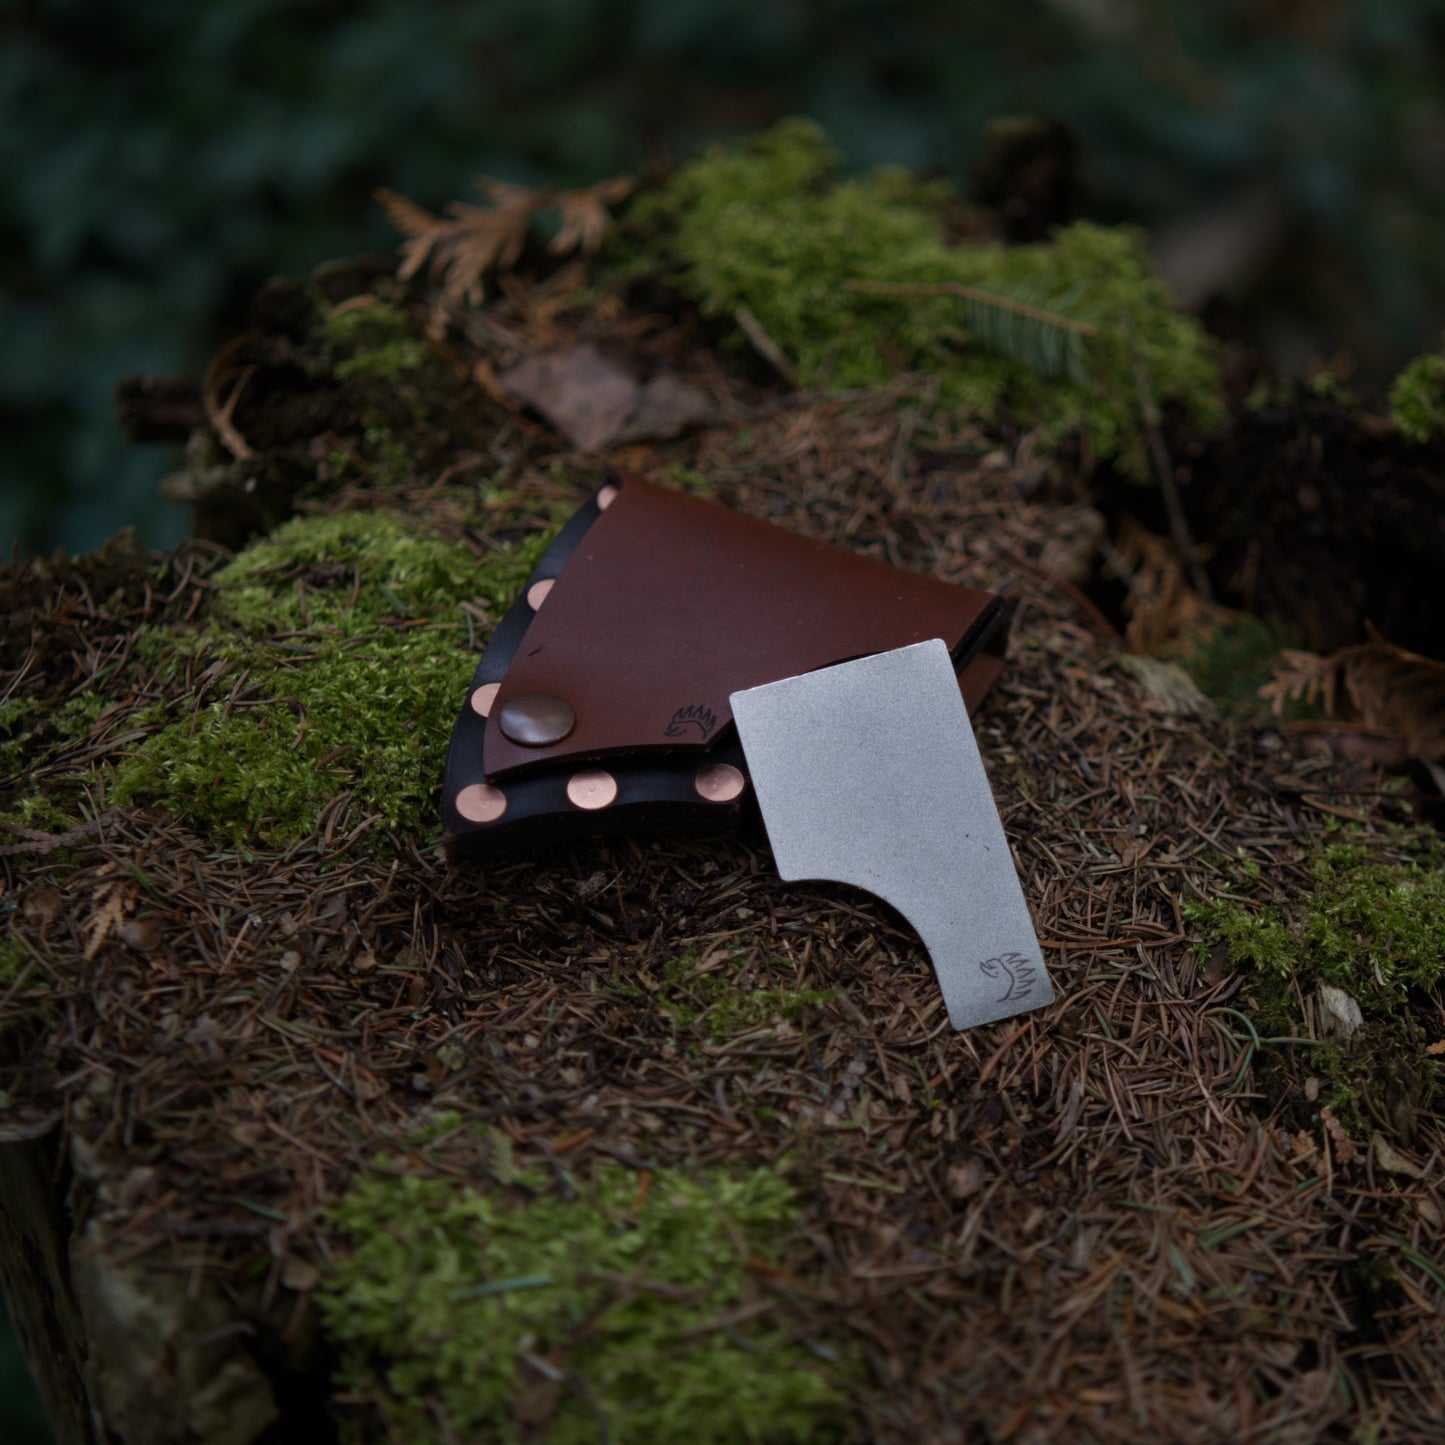 Axe Mask [With Sharpener Built In] - The Bear Essentials Outdoors Co., Gransfors Bruk -Small Forest Axe,